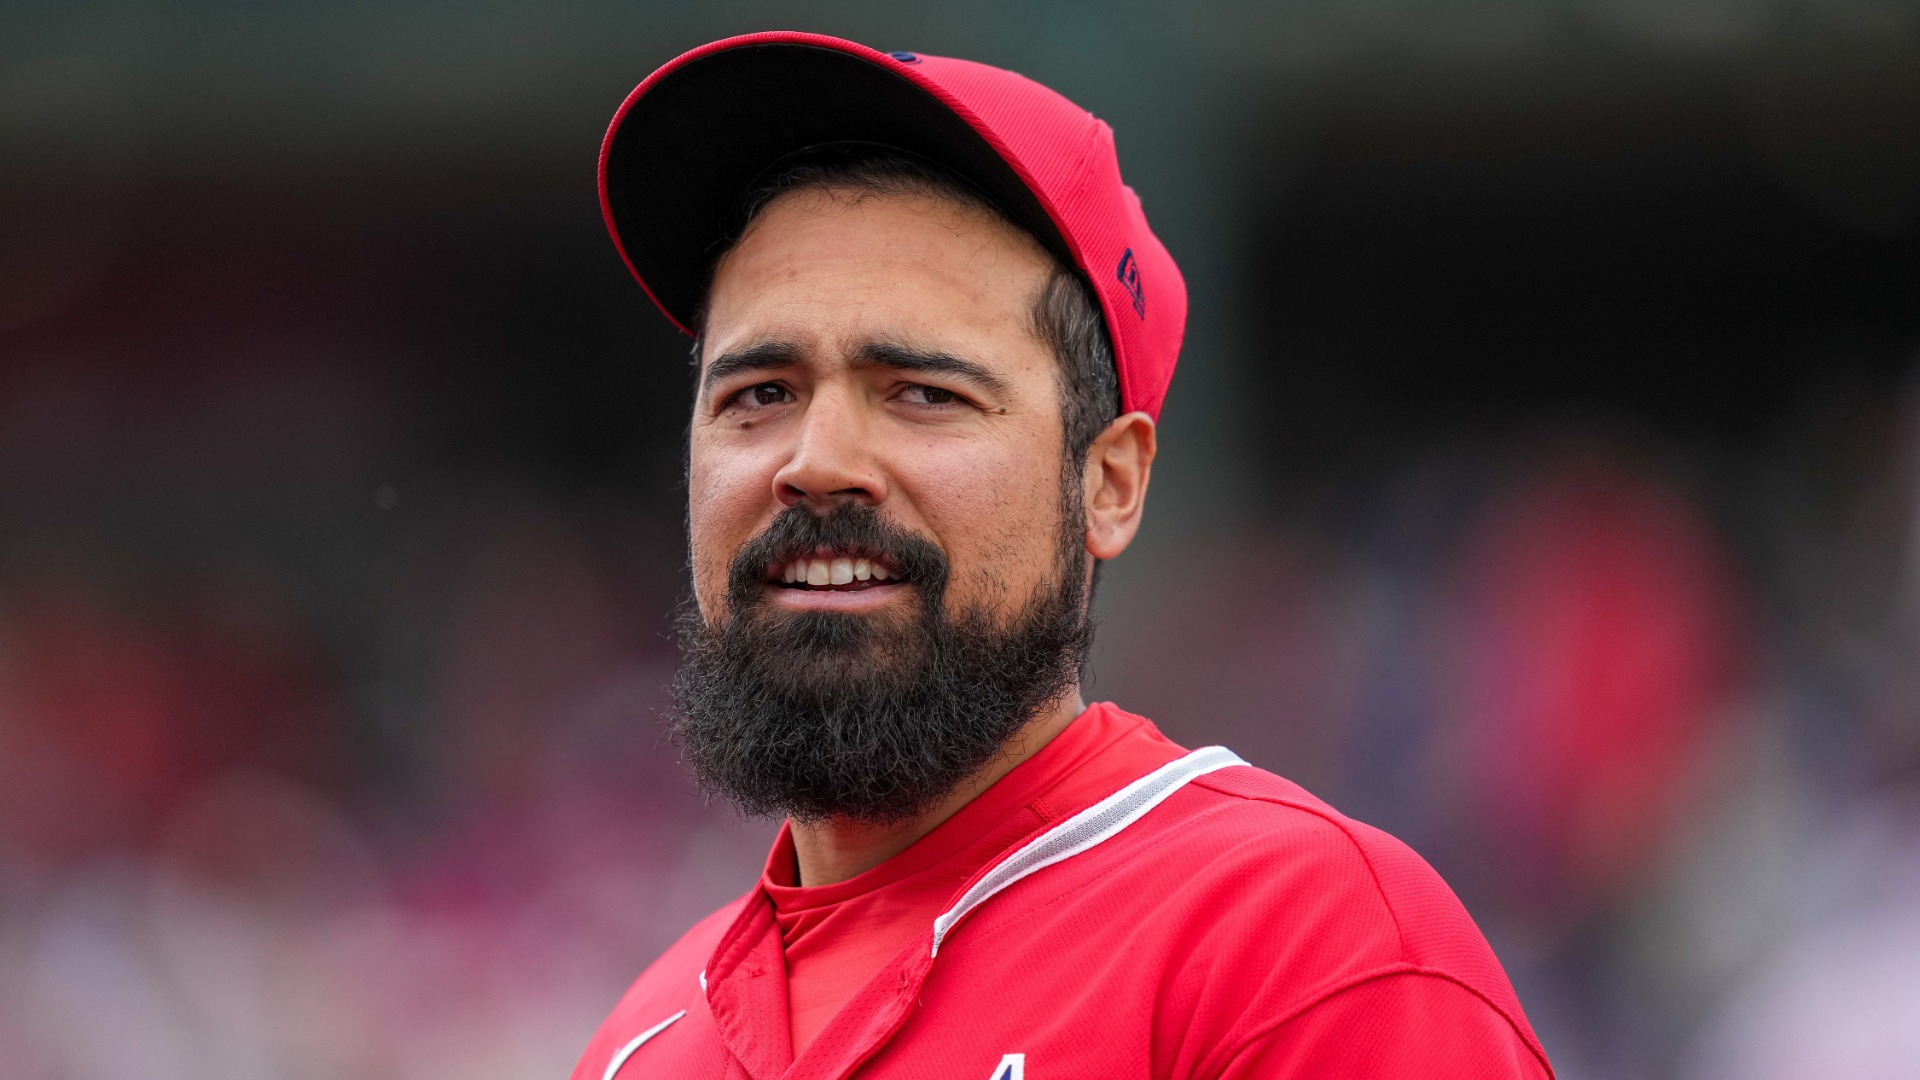 Anthony Rendon's new haircut (updated October 2023)